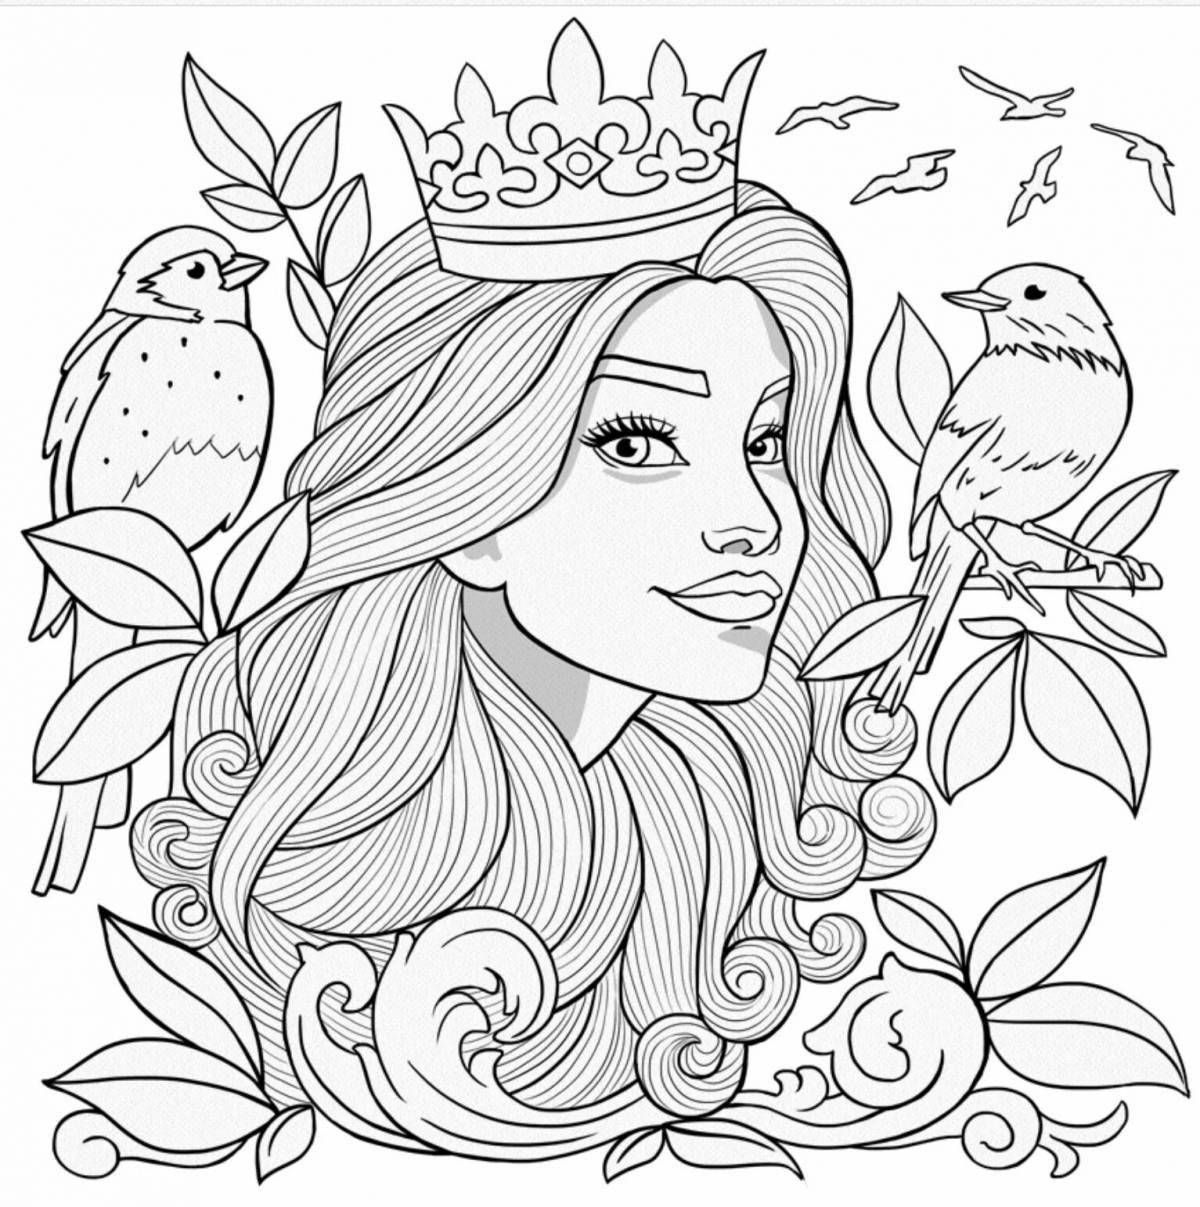 Glowing coloring pages for girls 14 years old, beautiful